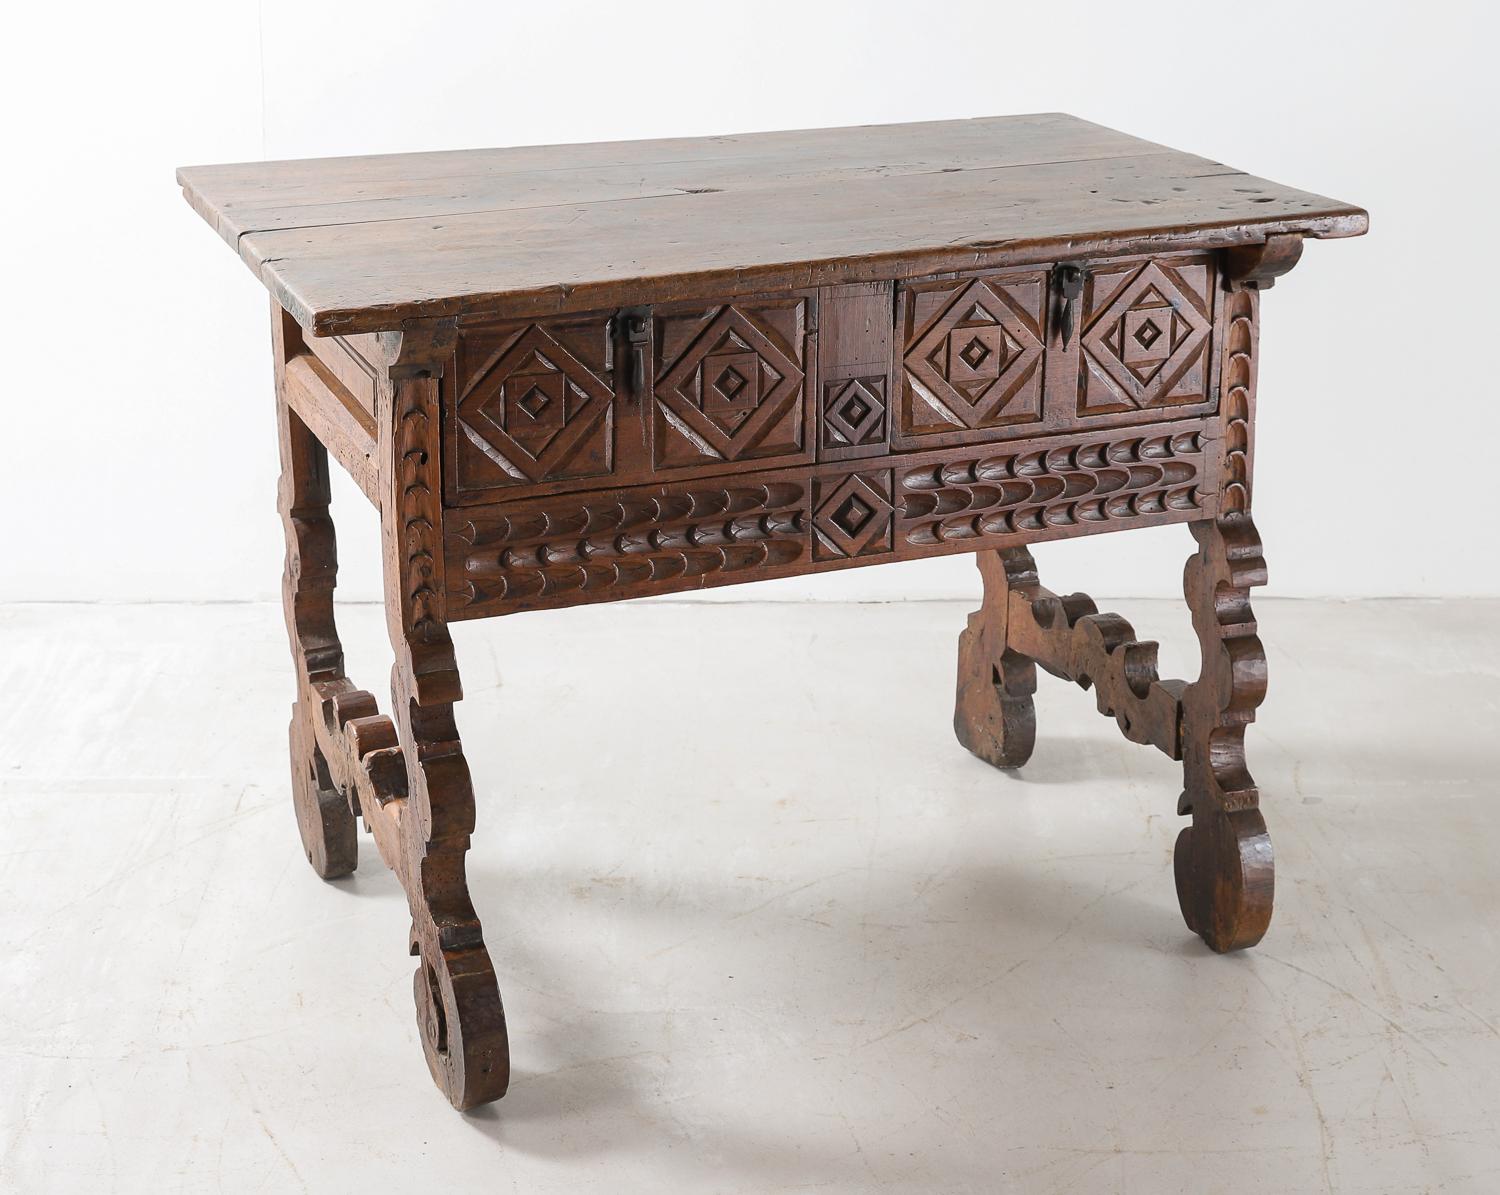 Spanish 18th Century Carved Walnut Table with Original Iron Pulls and Lyre Legs For Sale 3